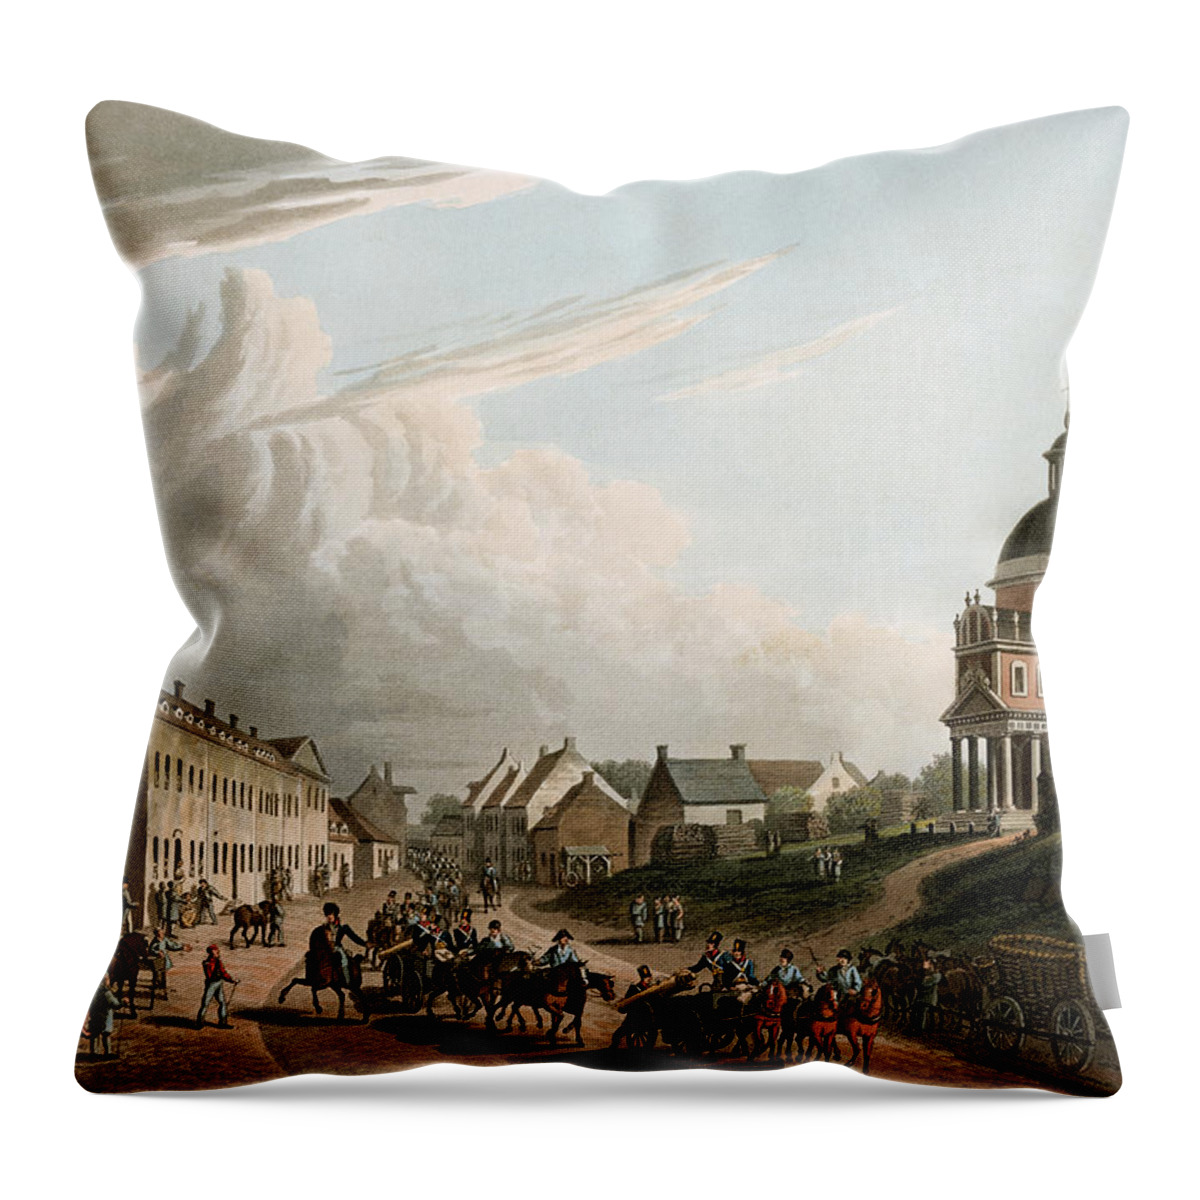 B1019 Throw Pillow featuring the painting Battle Of Waterloo, 1815 by Granger